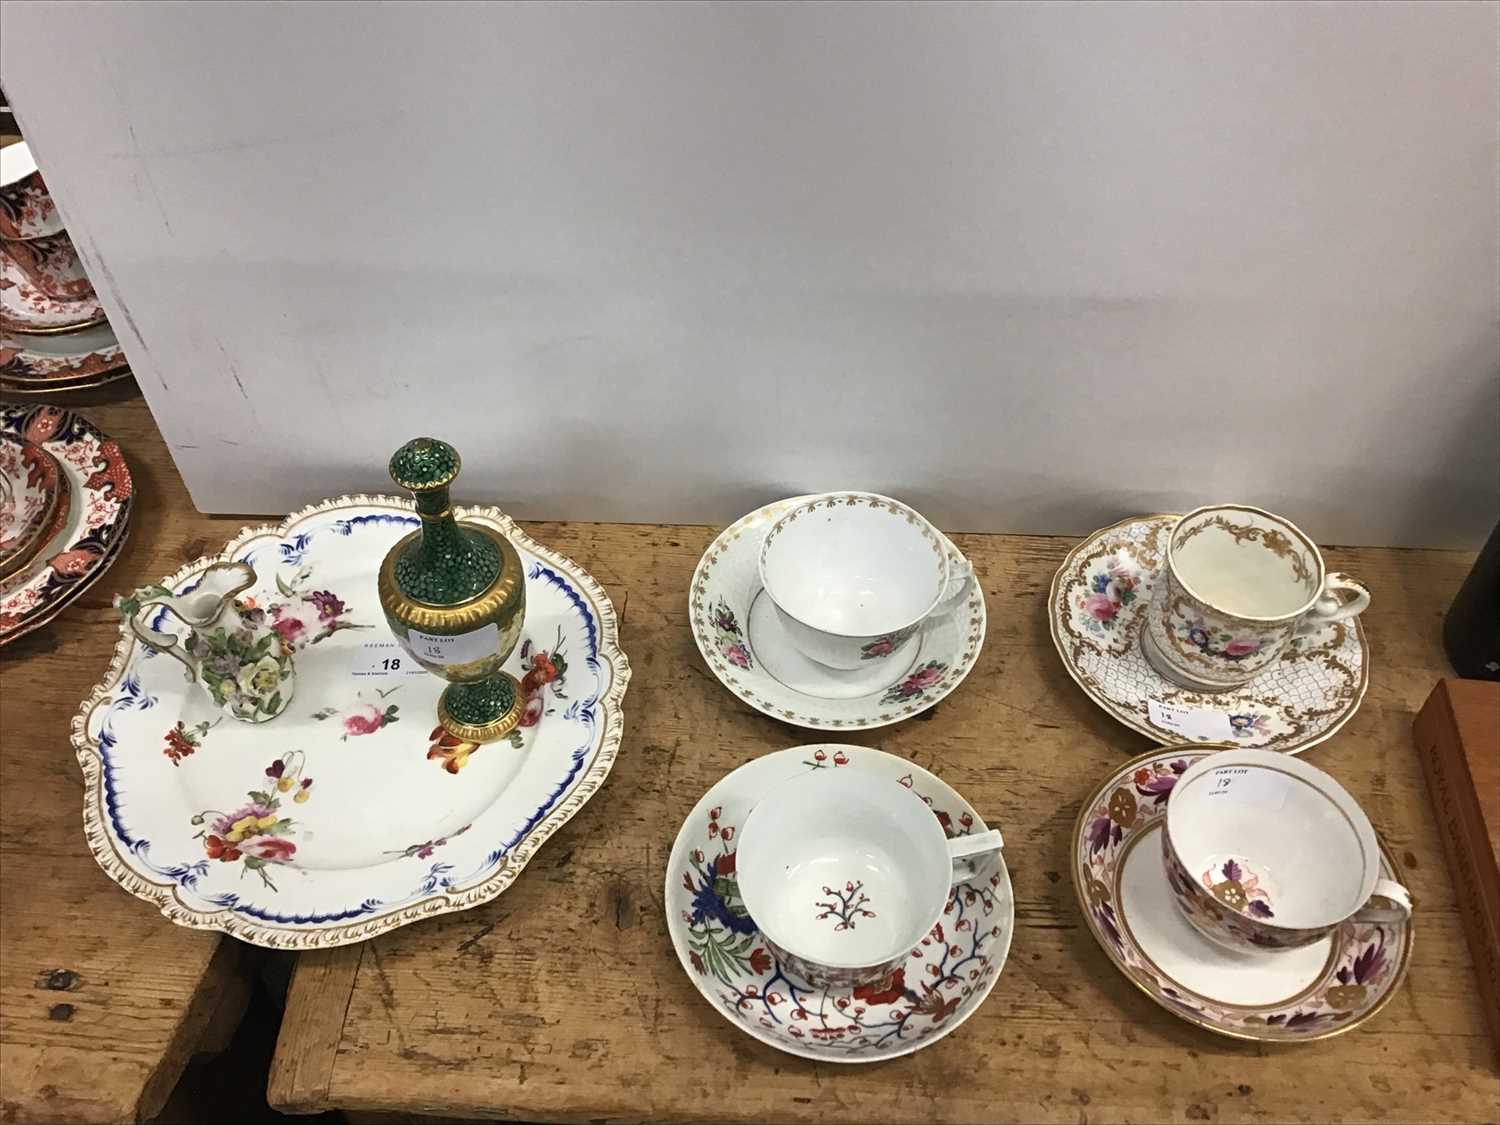 Lot 18 - Collection of 19th century English porcelain teawares - including Derby, Copeland & Garrett and Coalport vase and cover with finely painted landscape reserves (12)